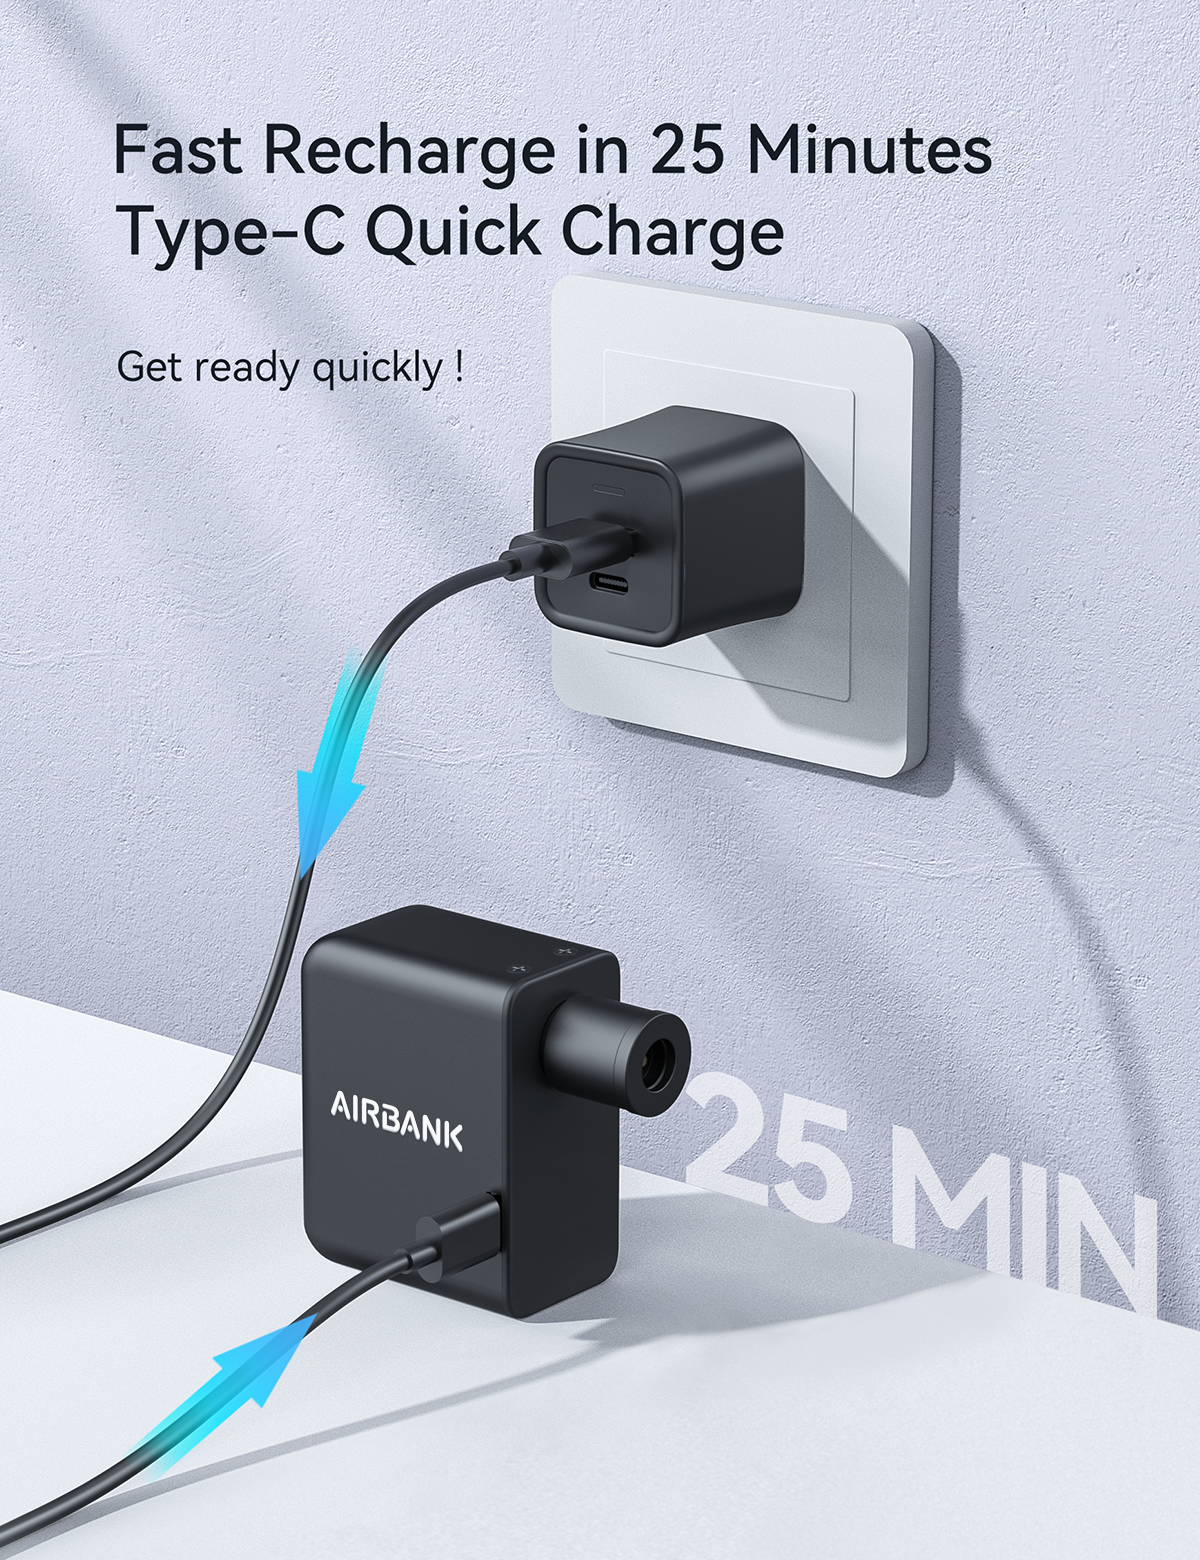 Fast recharge in 25 minutes: Type-C Quick Charge